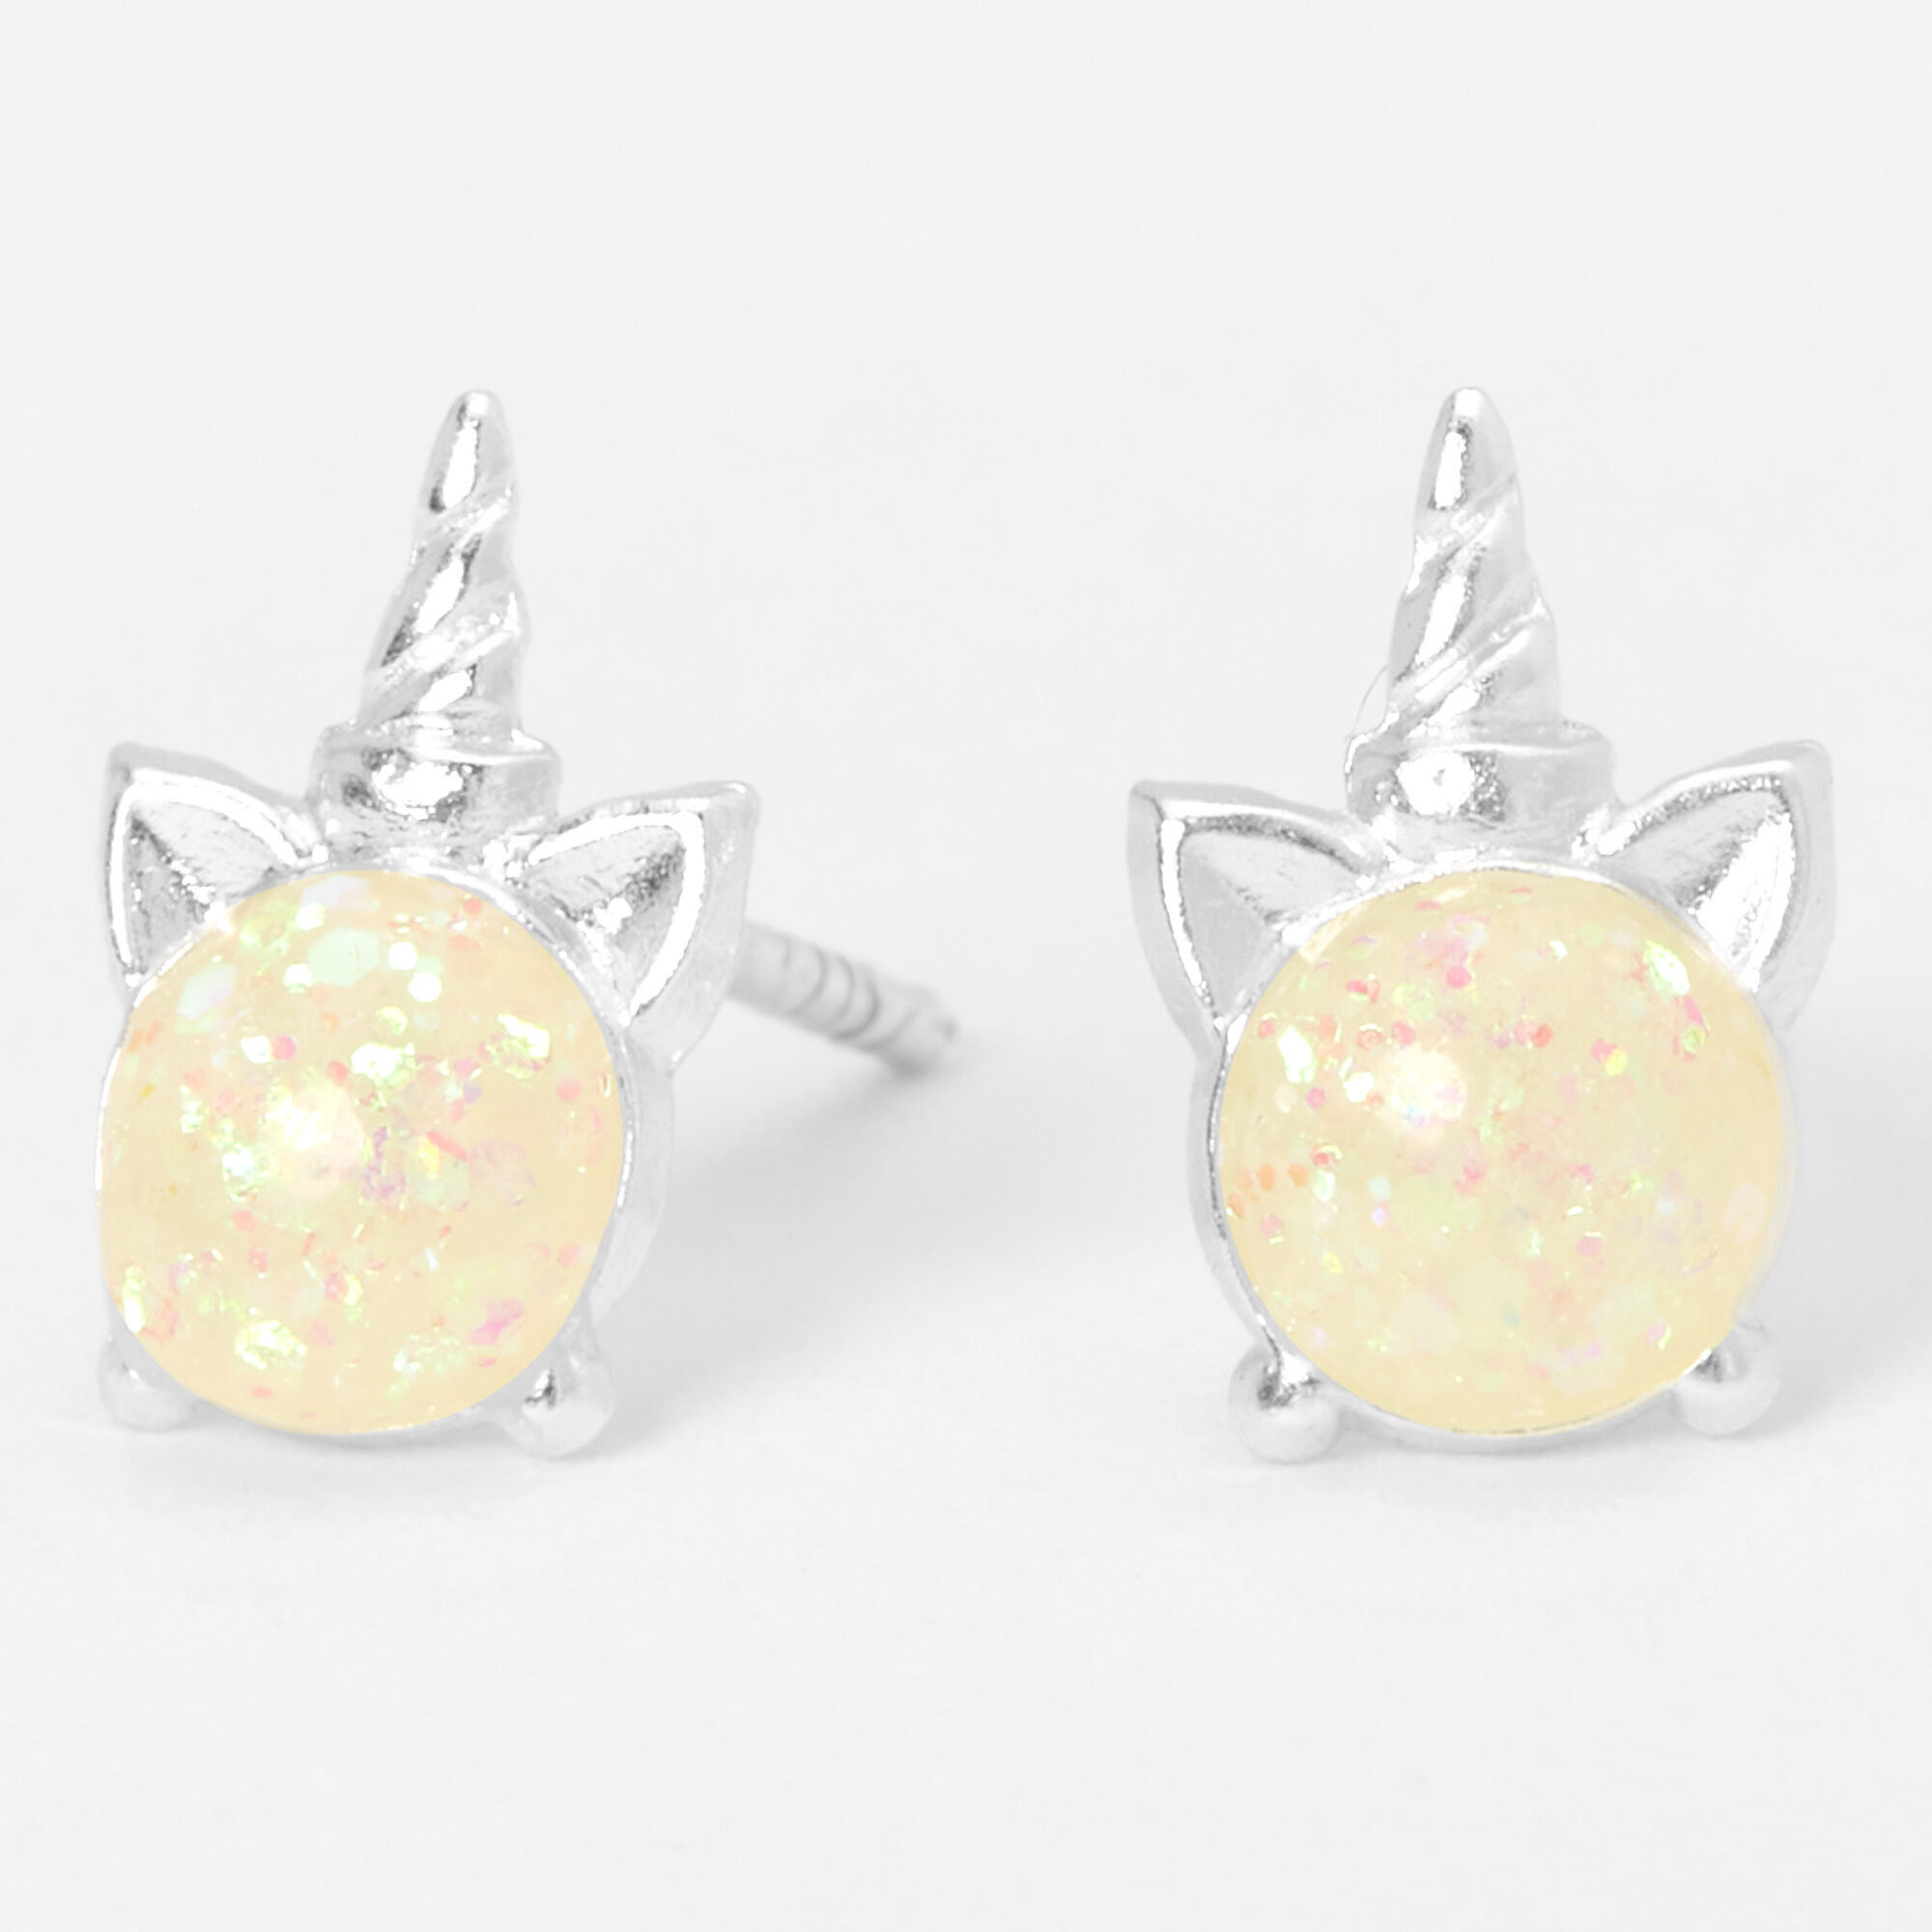 View Claires Unicorn Head Stud Earrings Silver information